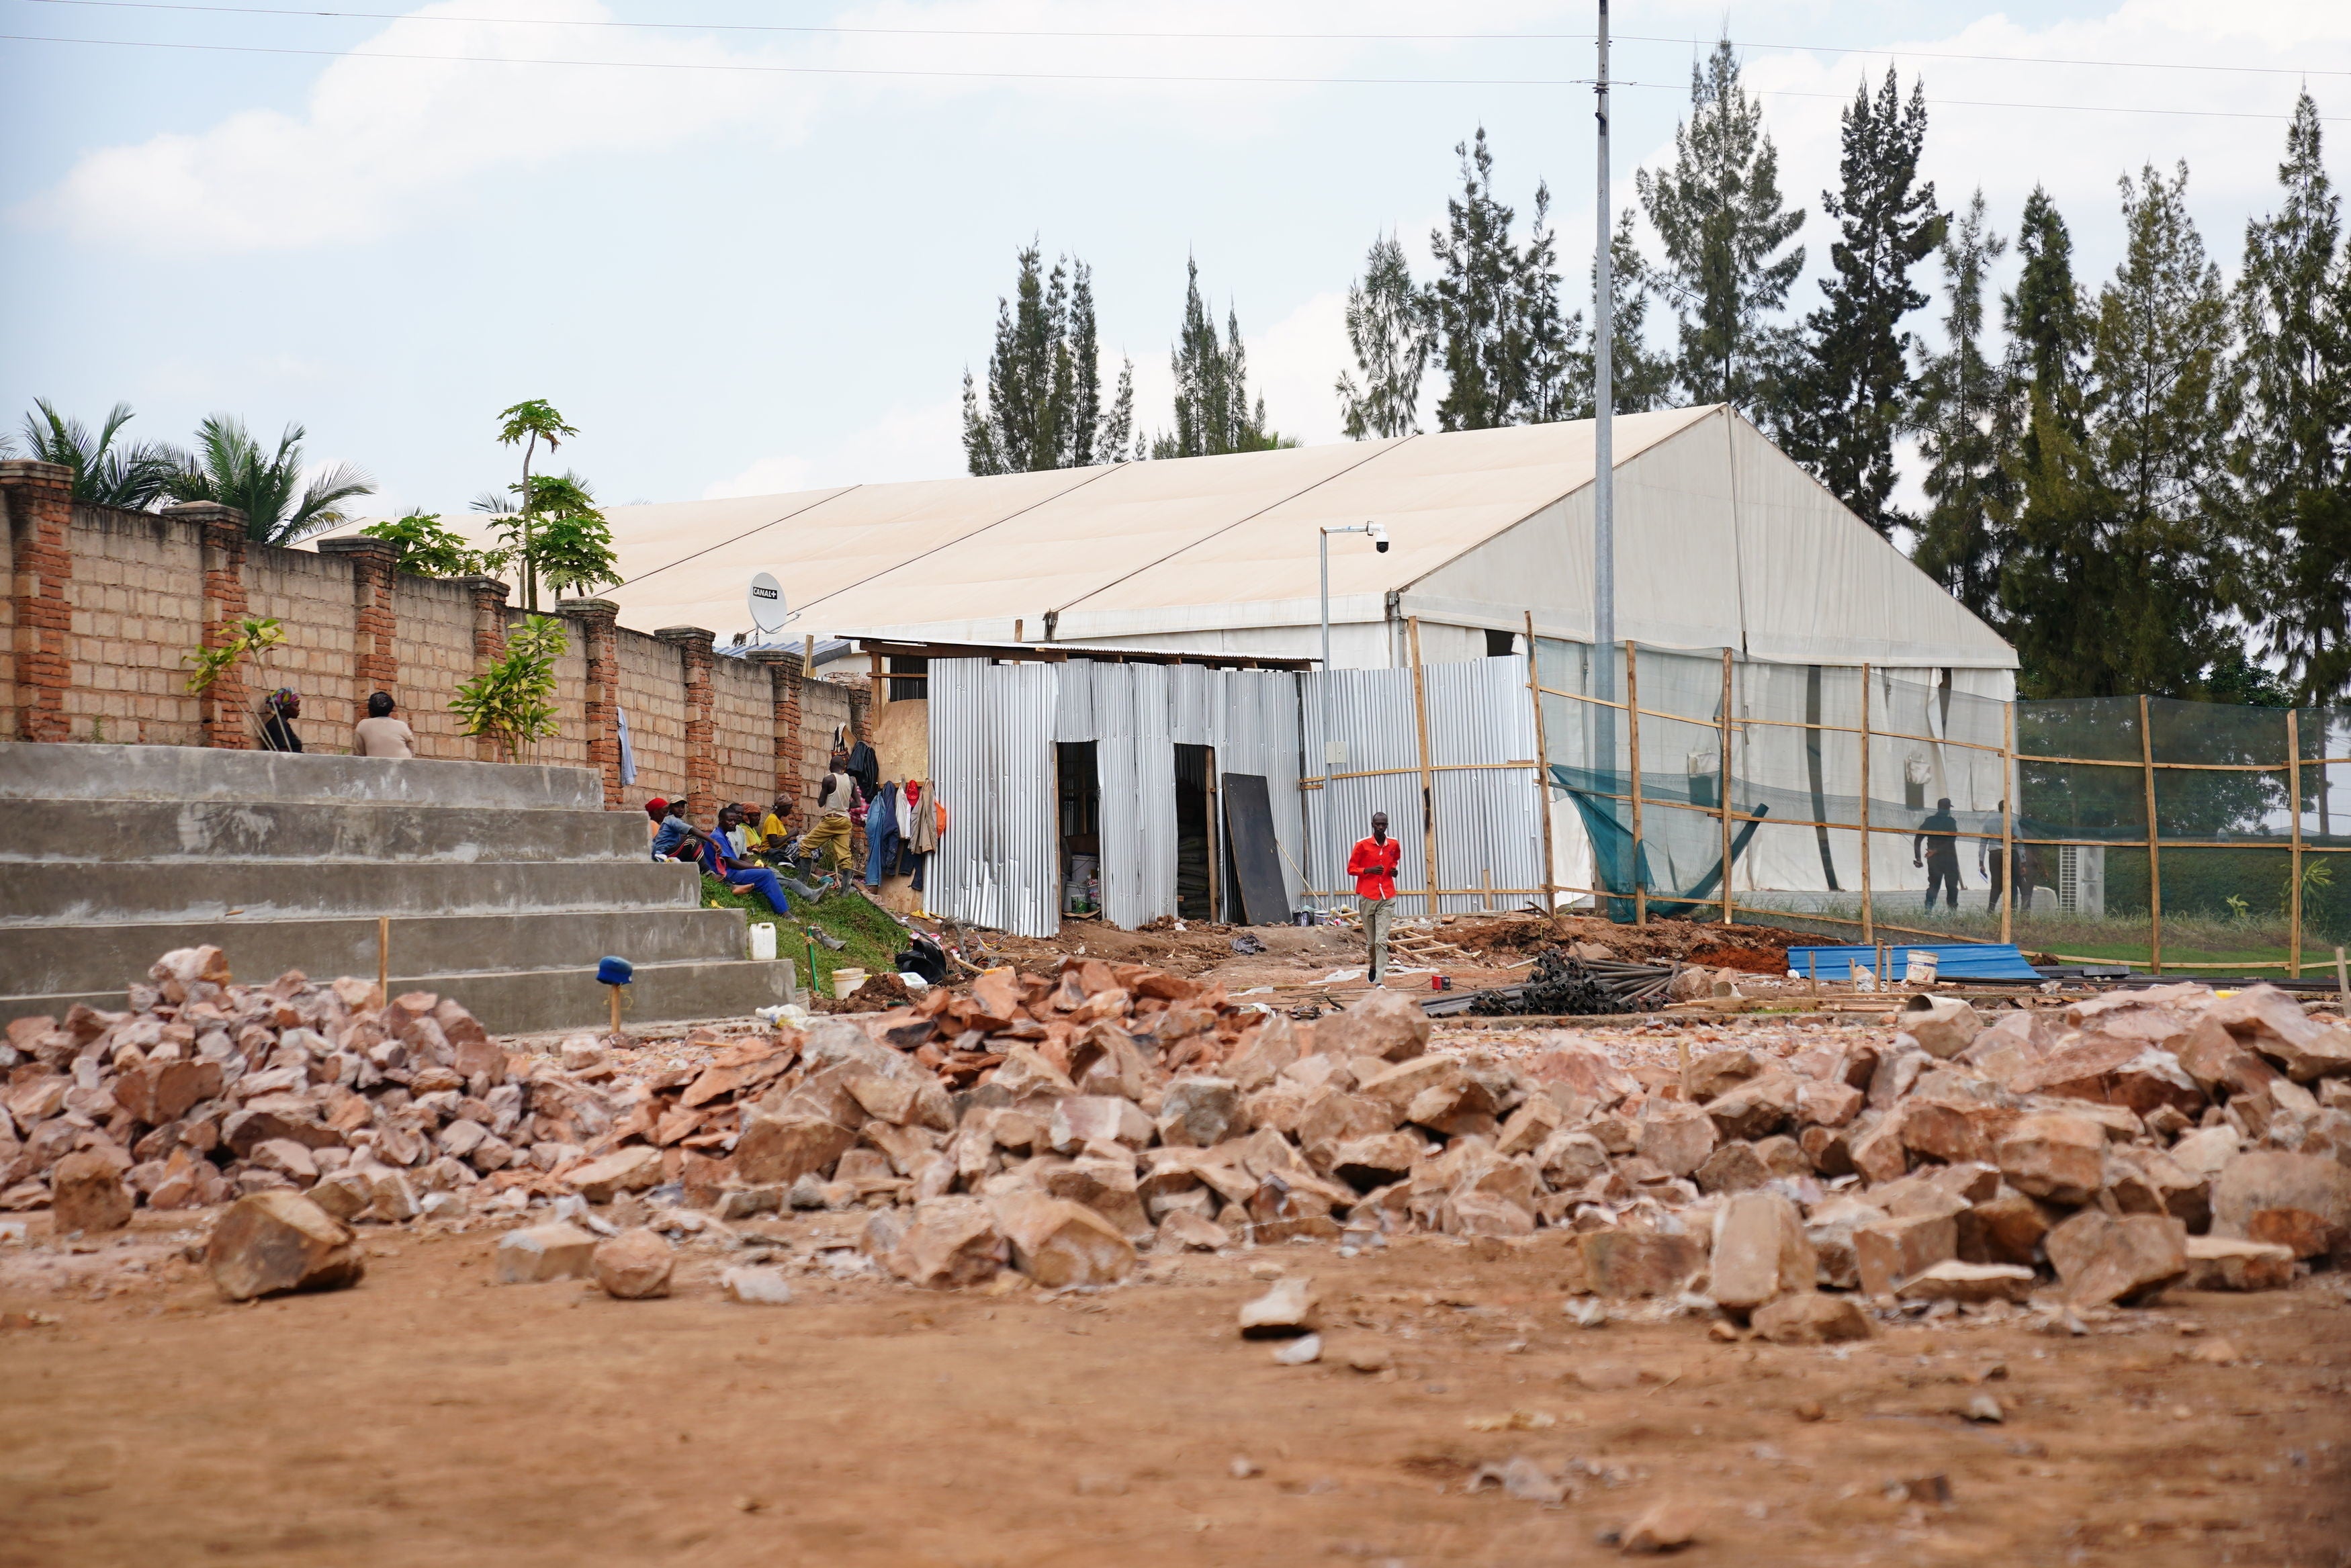 The processing tent next to Hope Hostel in Kigali, where migrants from the UK will be sent under the partnership